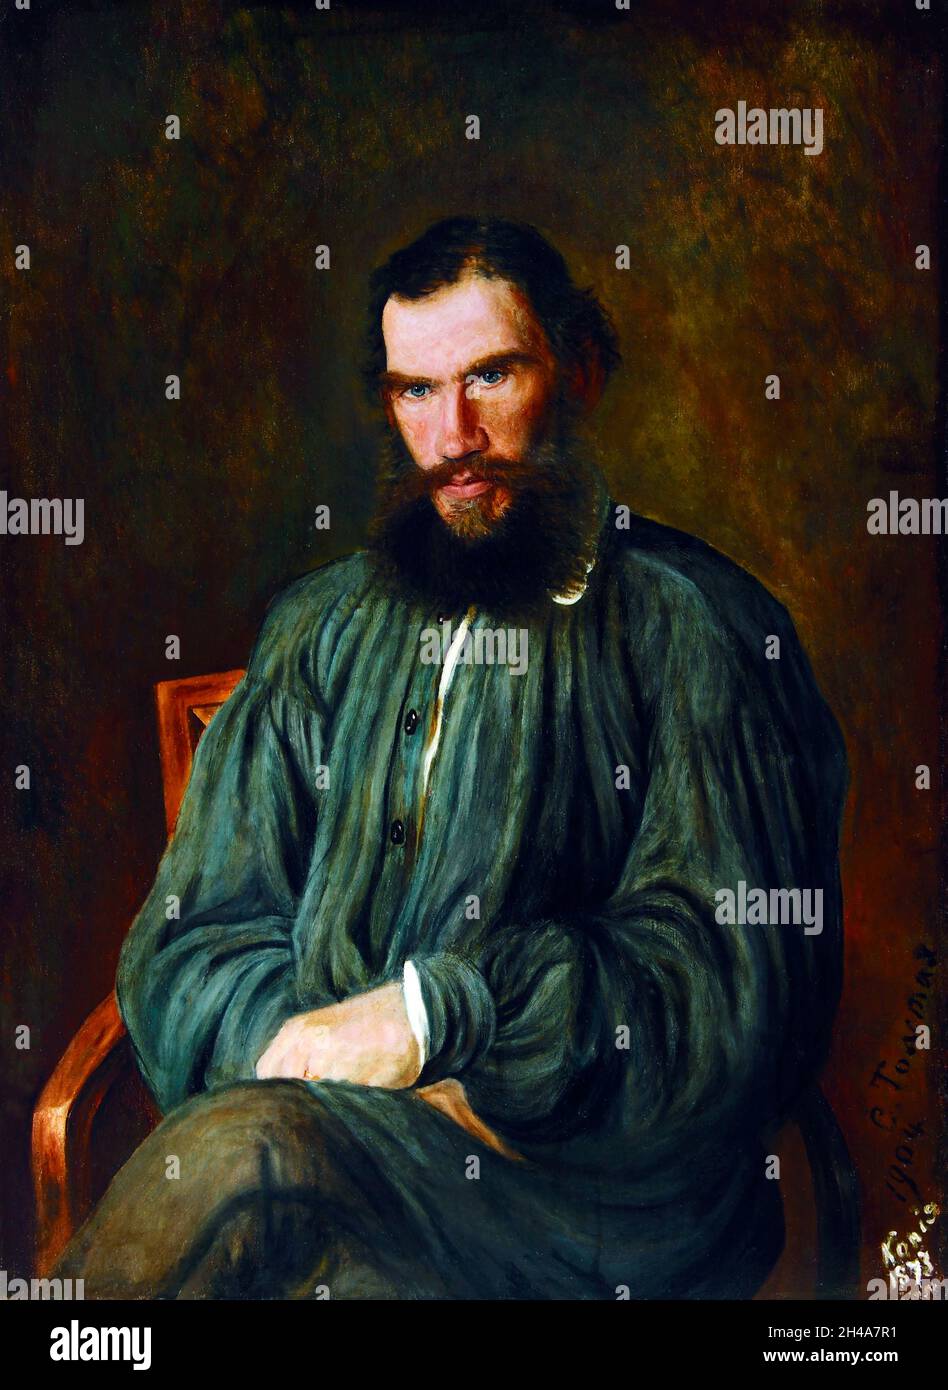 Leo Tolstoy. Portrait of the famous Russian writer, Count Lev Nikolayevich Tolstoy (1828-1910) in 1873, oil on canvas, 1904 Stock Photo